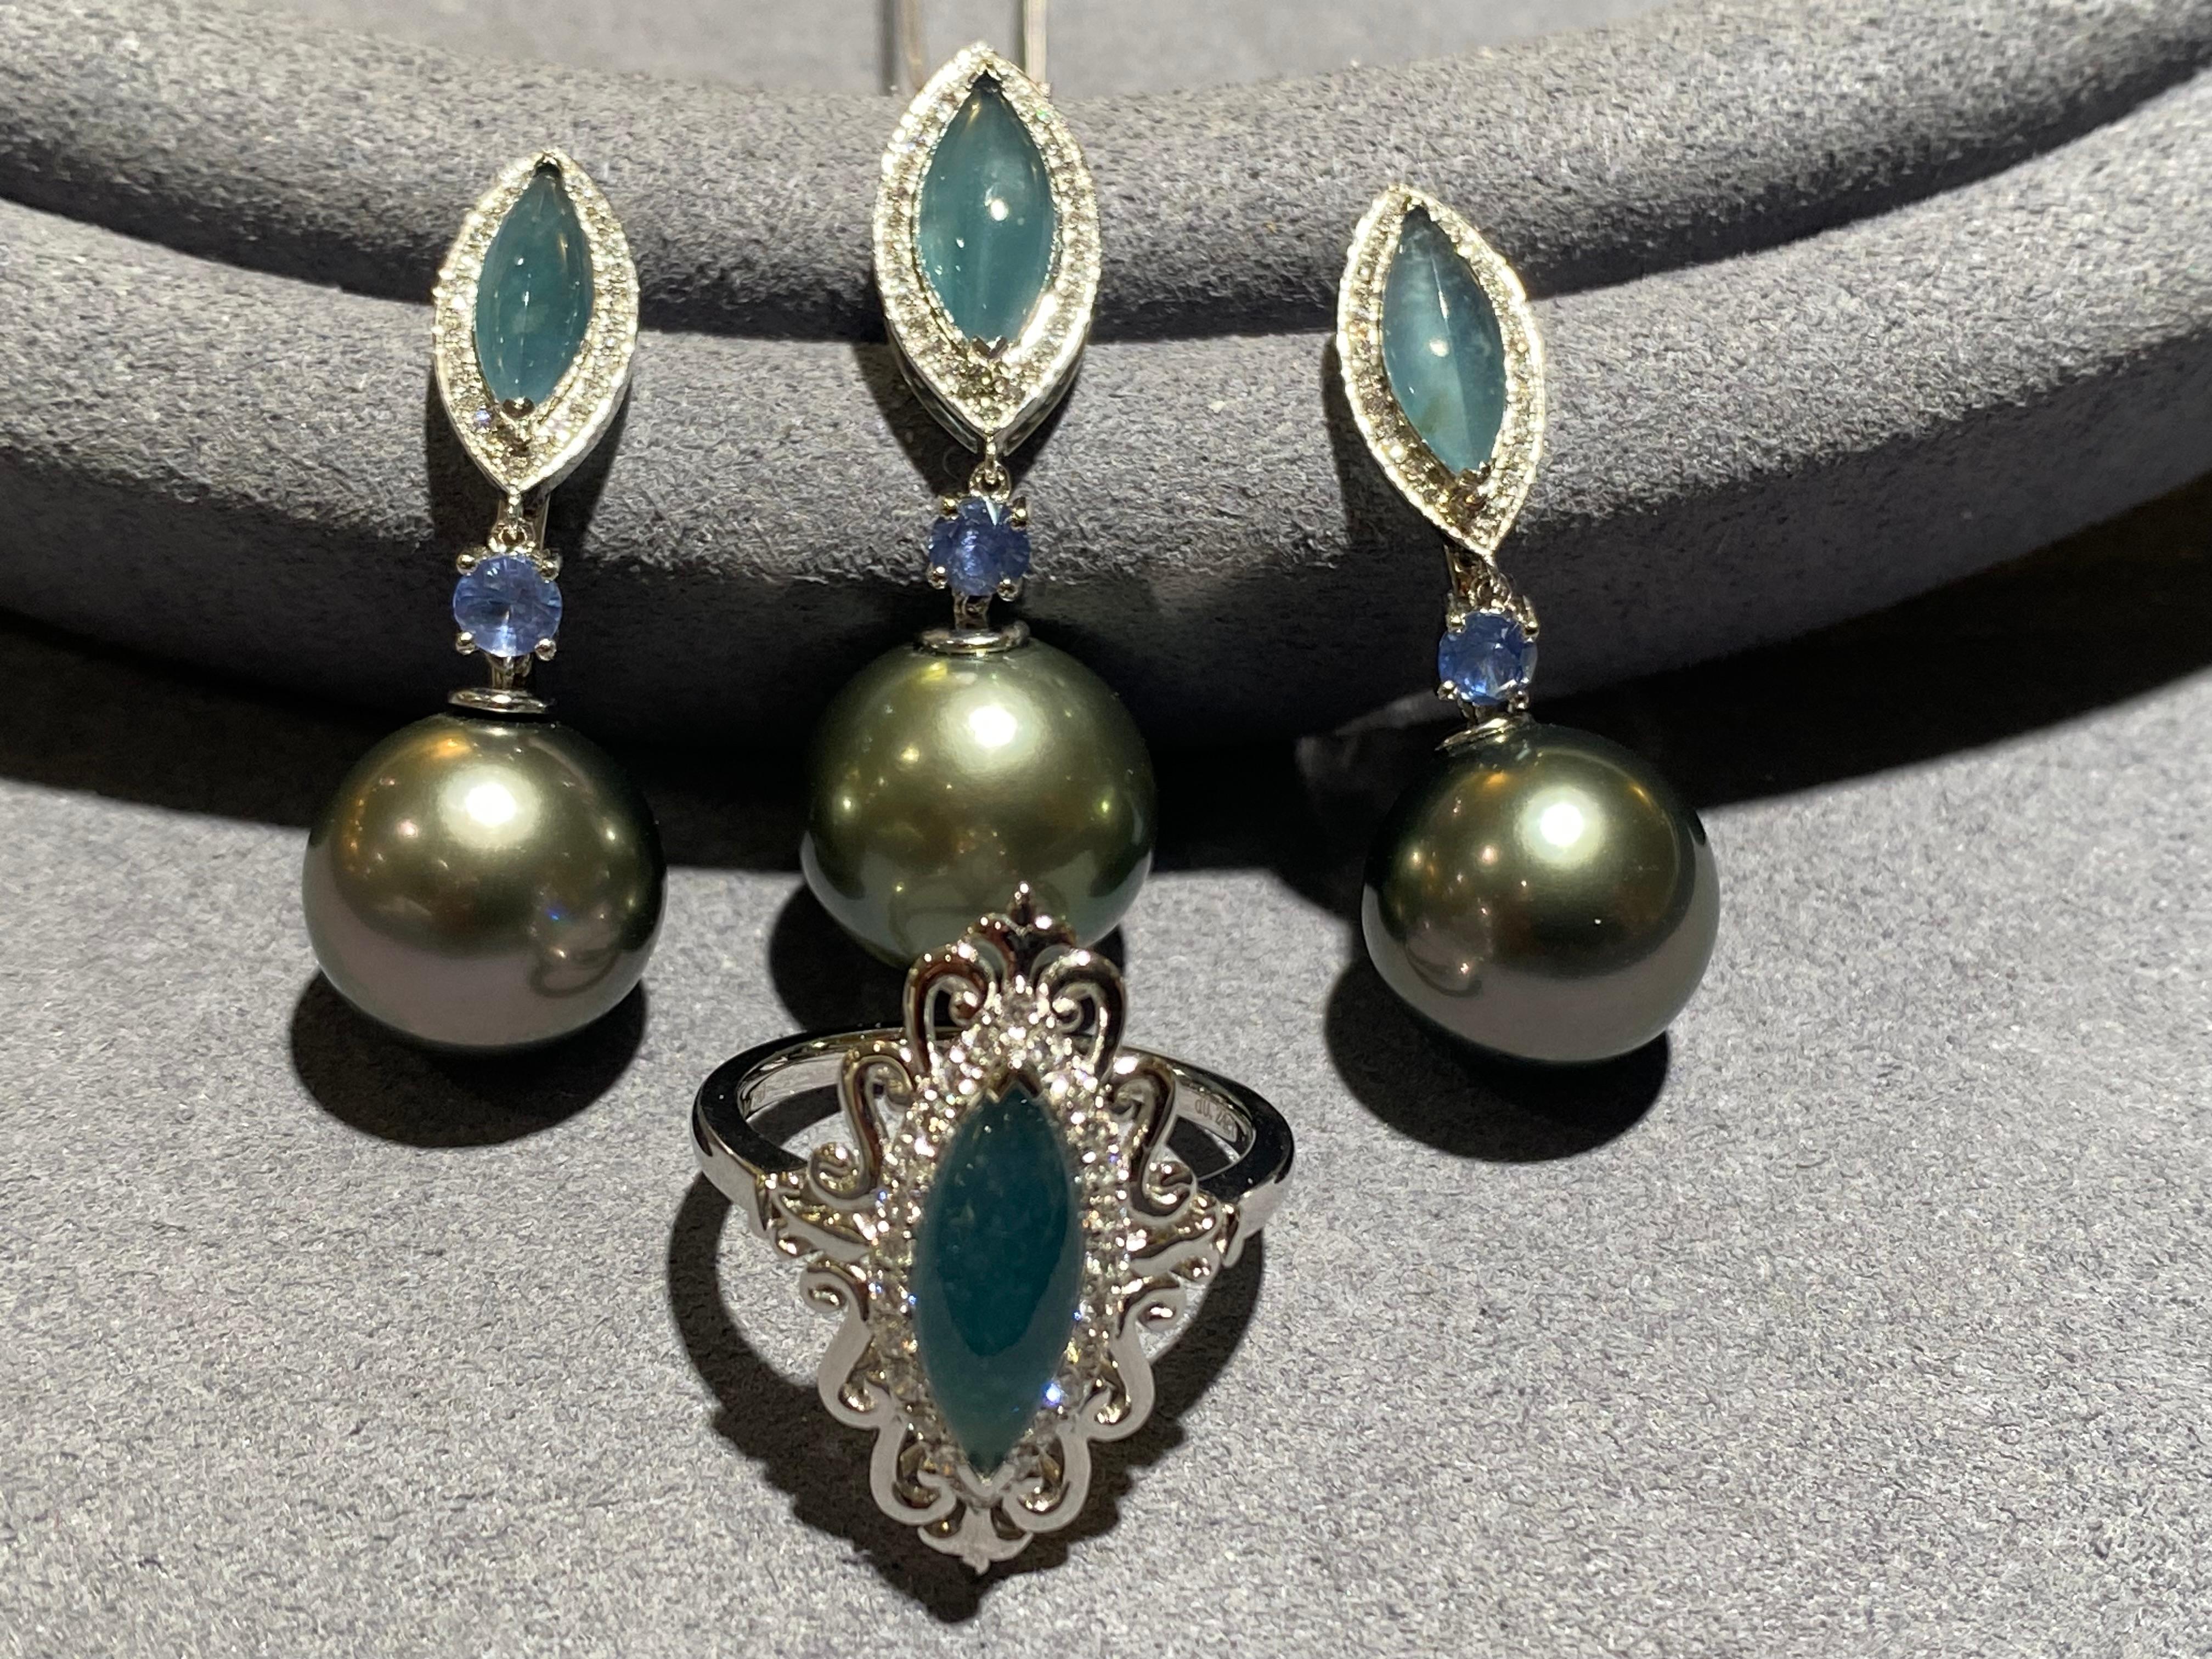 This jewellery set consists of a pair of earrings, a ring and a pendant. They all have a marquise cabochon blue jadeite as the centre stone in this jewellery set.  The jadeite on the ring is surrounded by a circle of micro diamond pave and on the